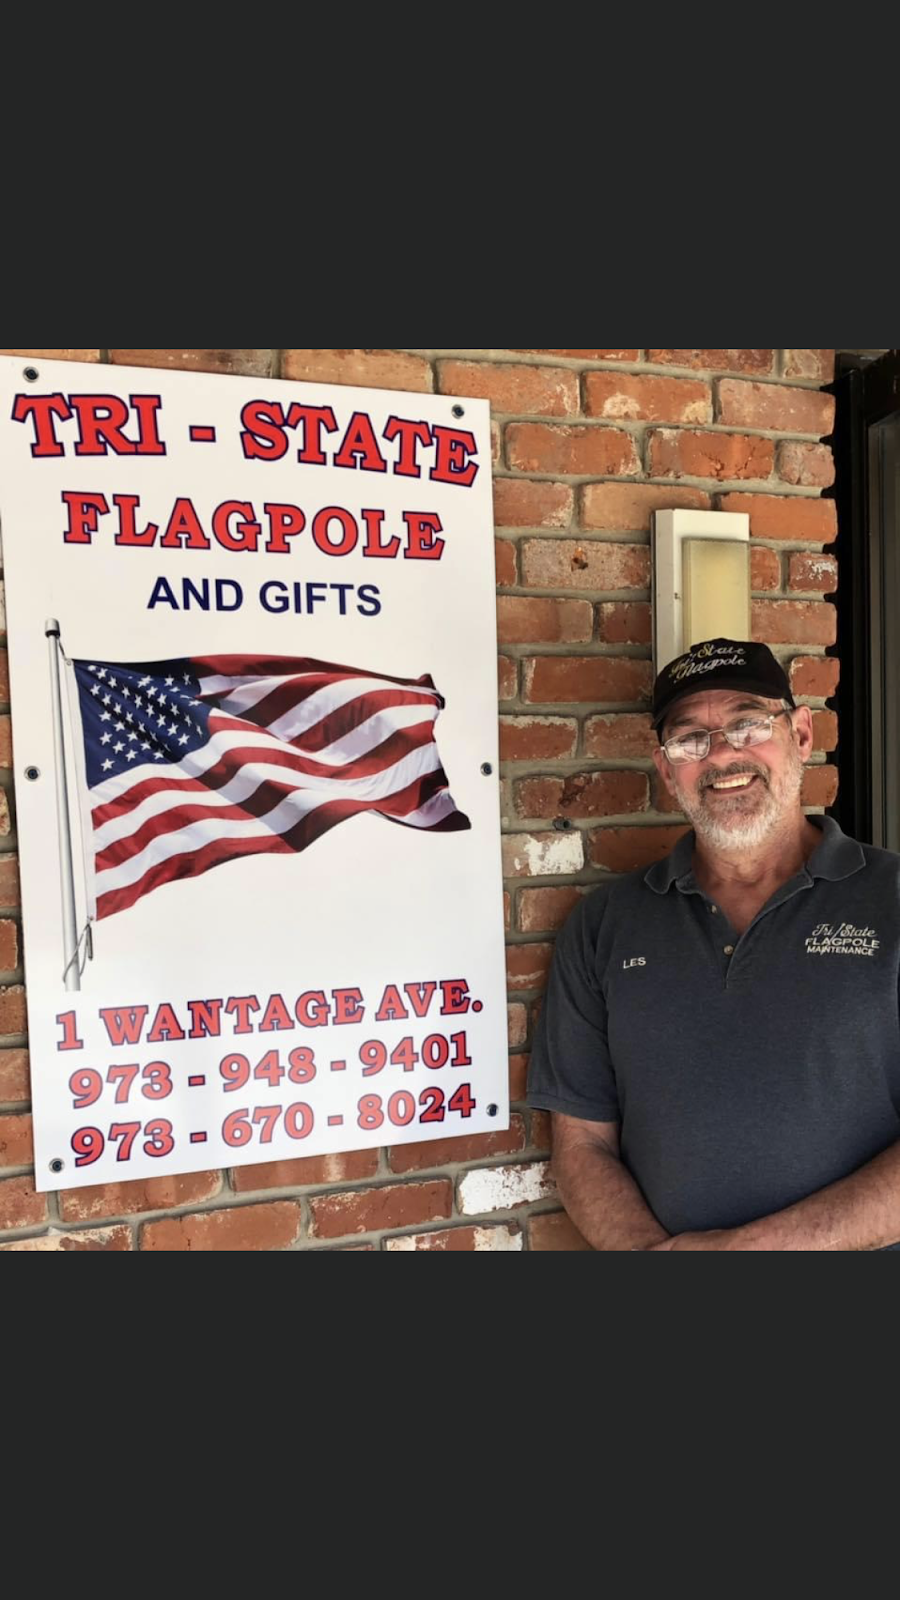 Tri-State Flagpole And Gifts | 1 Wantage Ave, Branchville, NJ 07826 | Phone: (973) 948-9401